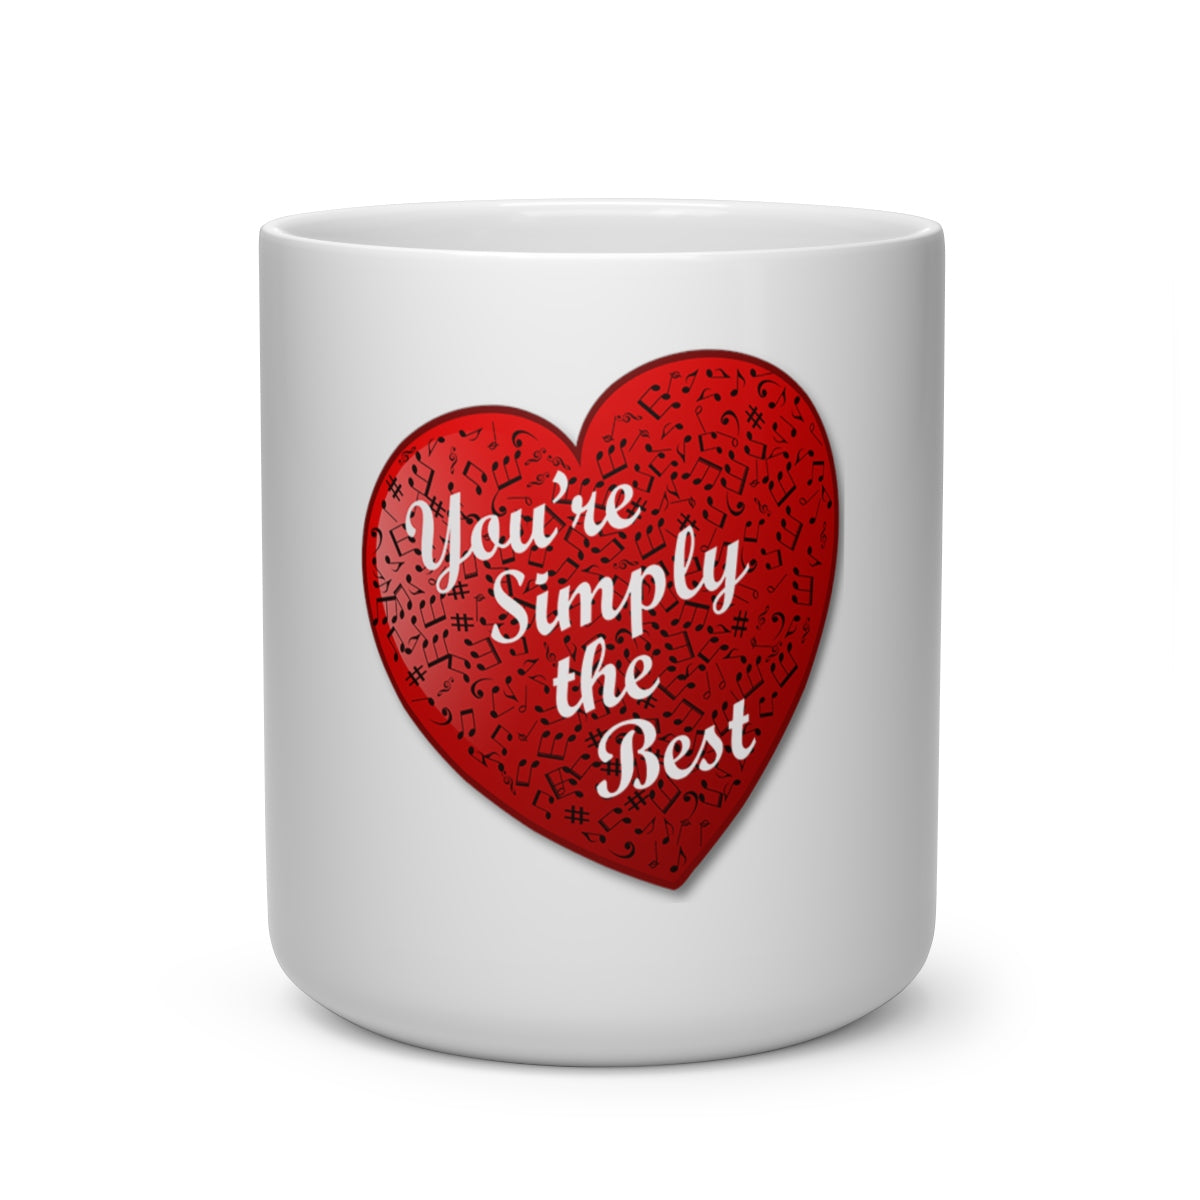 You're Simply the Best - Coffee Cup Mug with Heart-Shaped Handle 11 oz